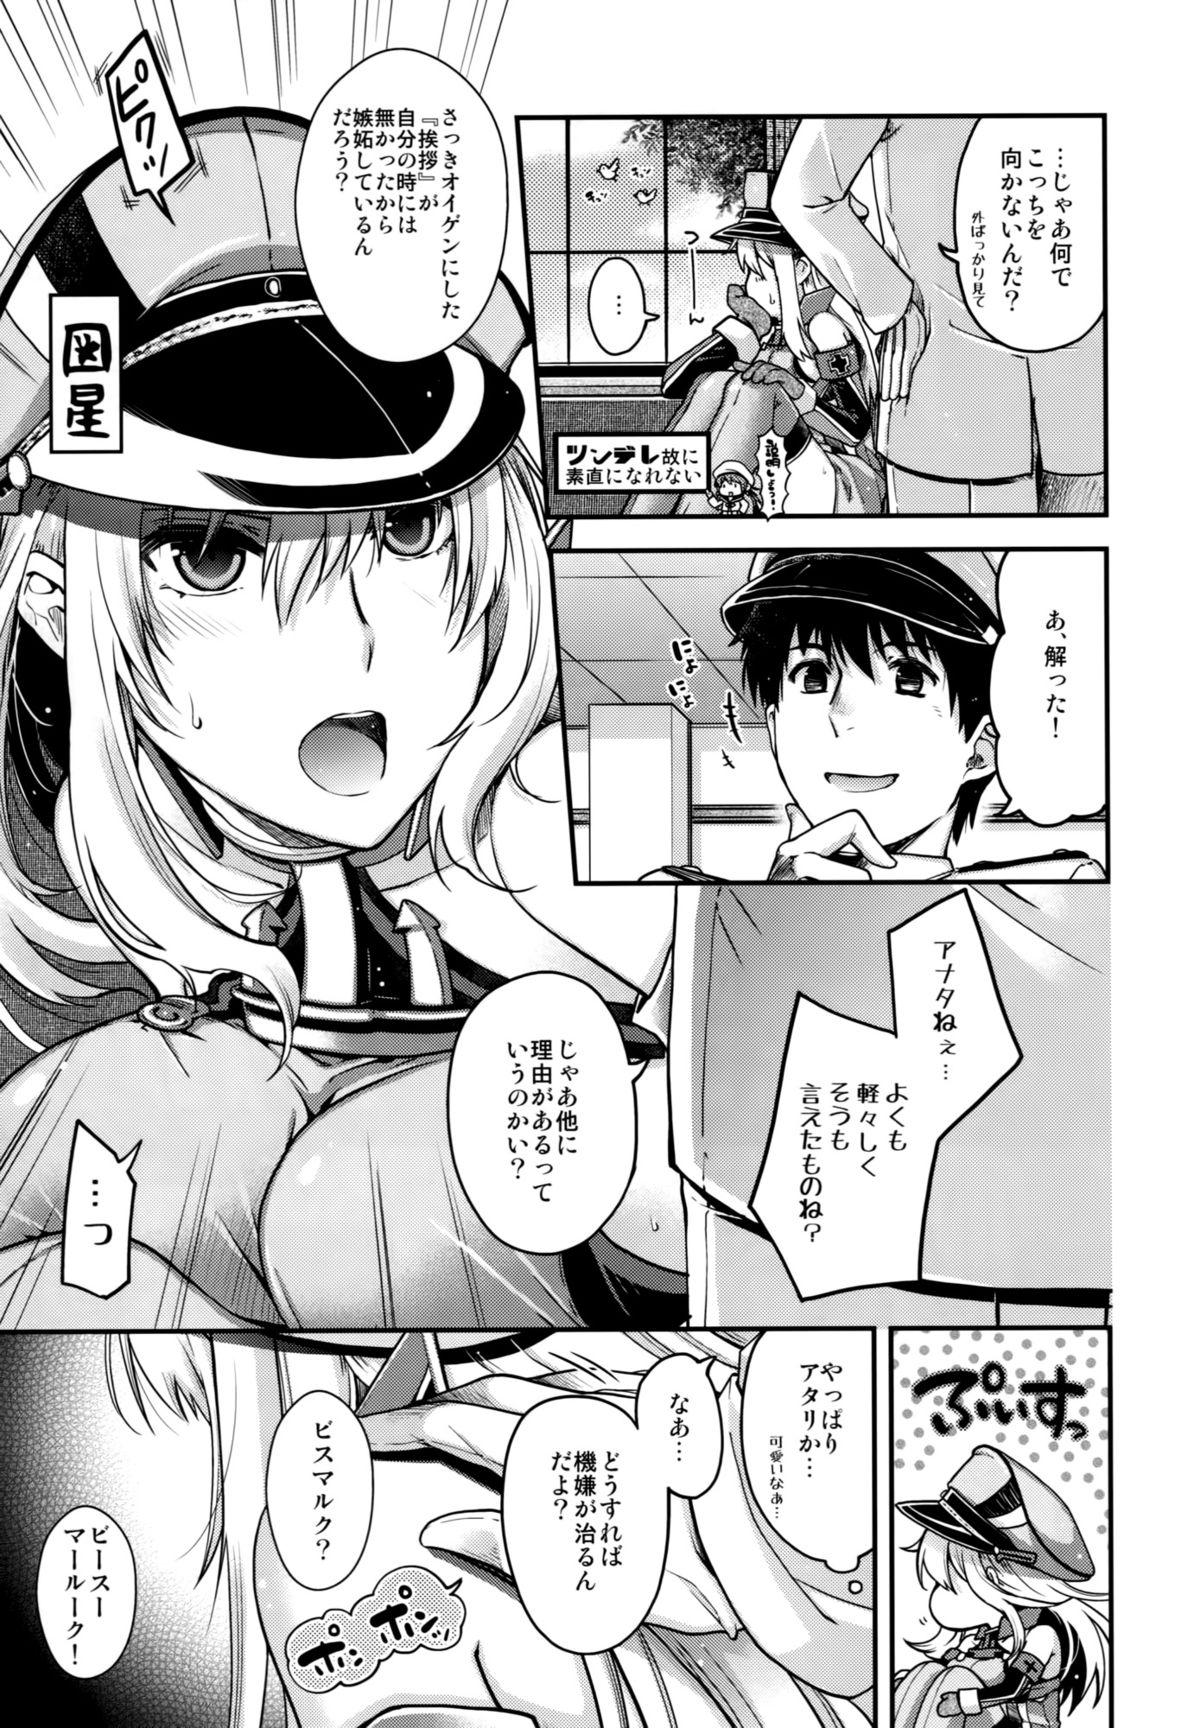 The Admiral! - Kantai collection 3way - Page 6